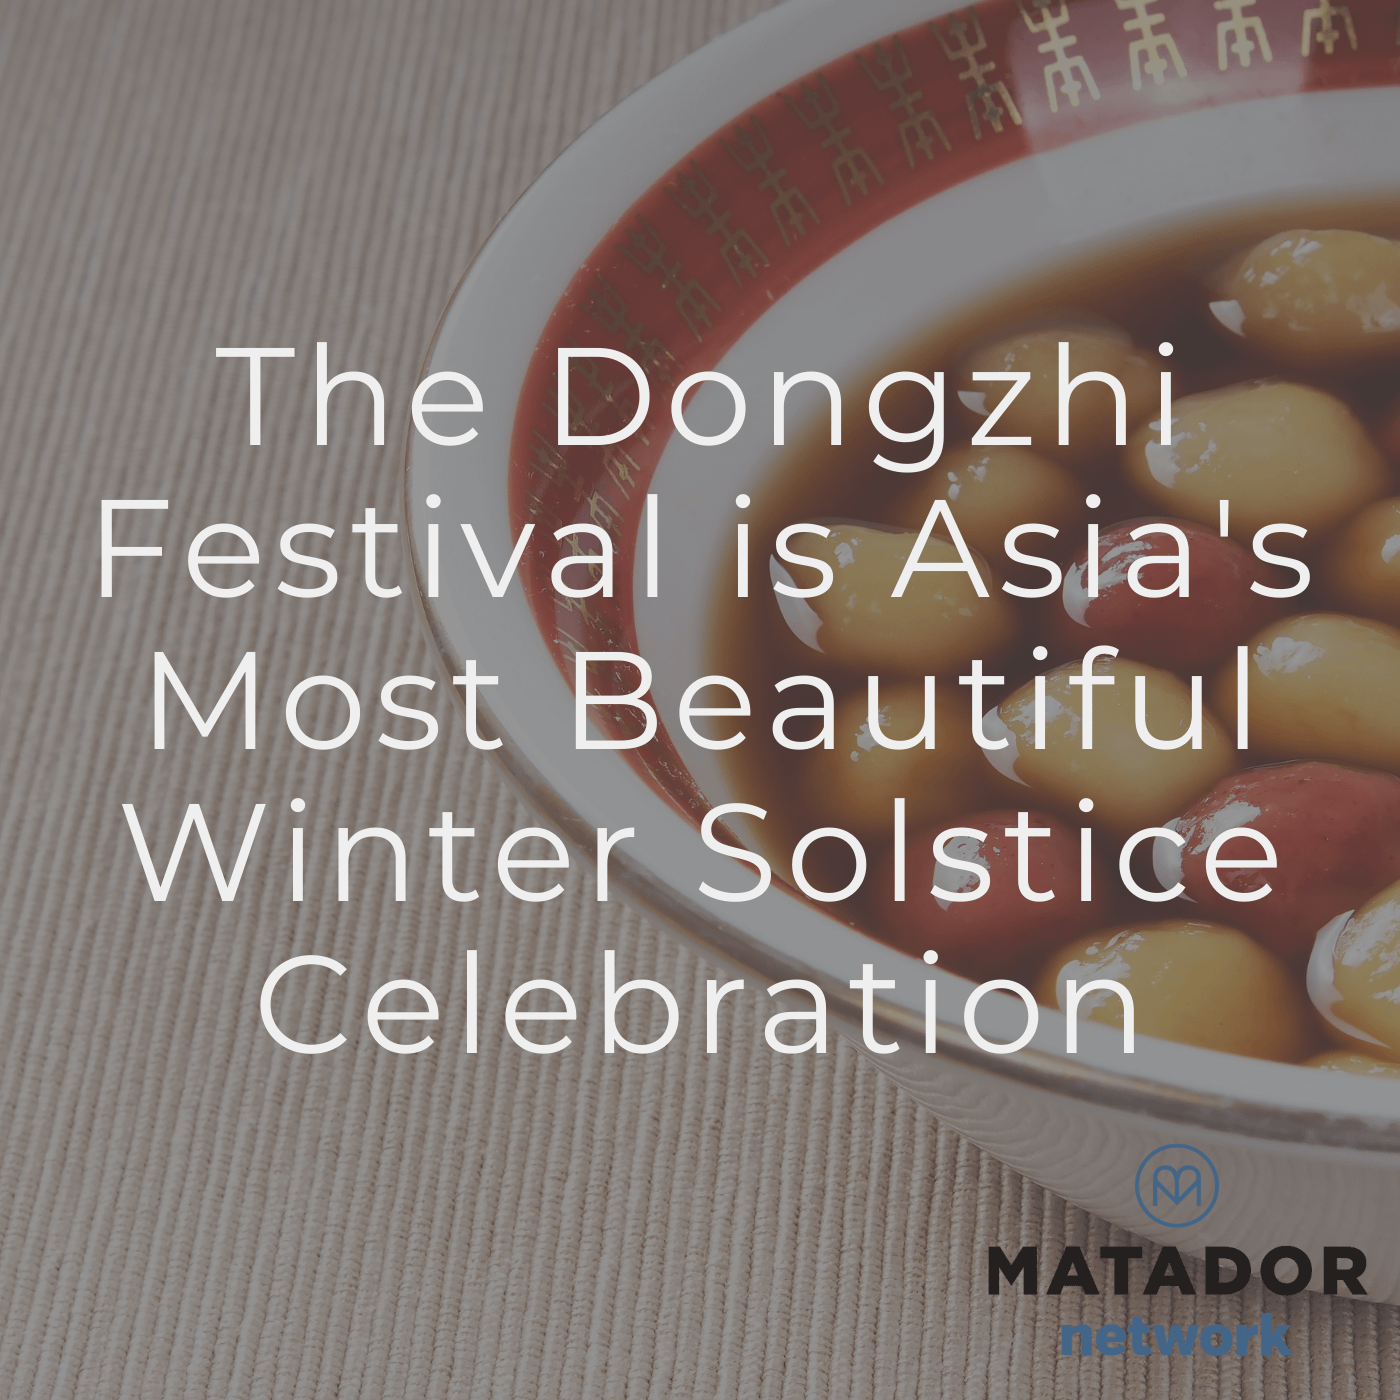 The Dongzhi Festival is Asia’s Most Beautiful Winter Solstice Celebration